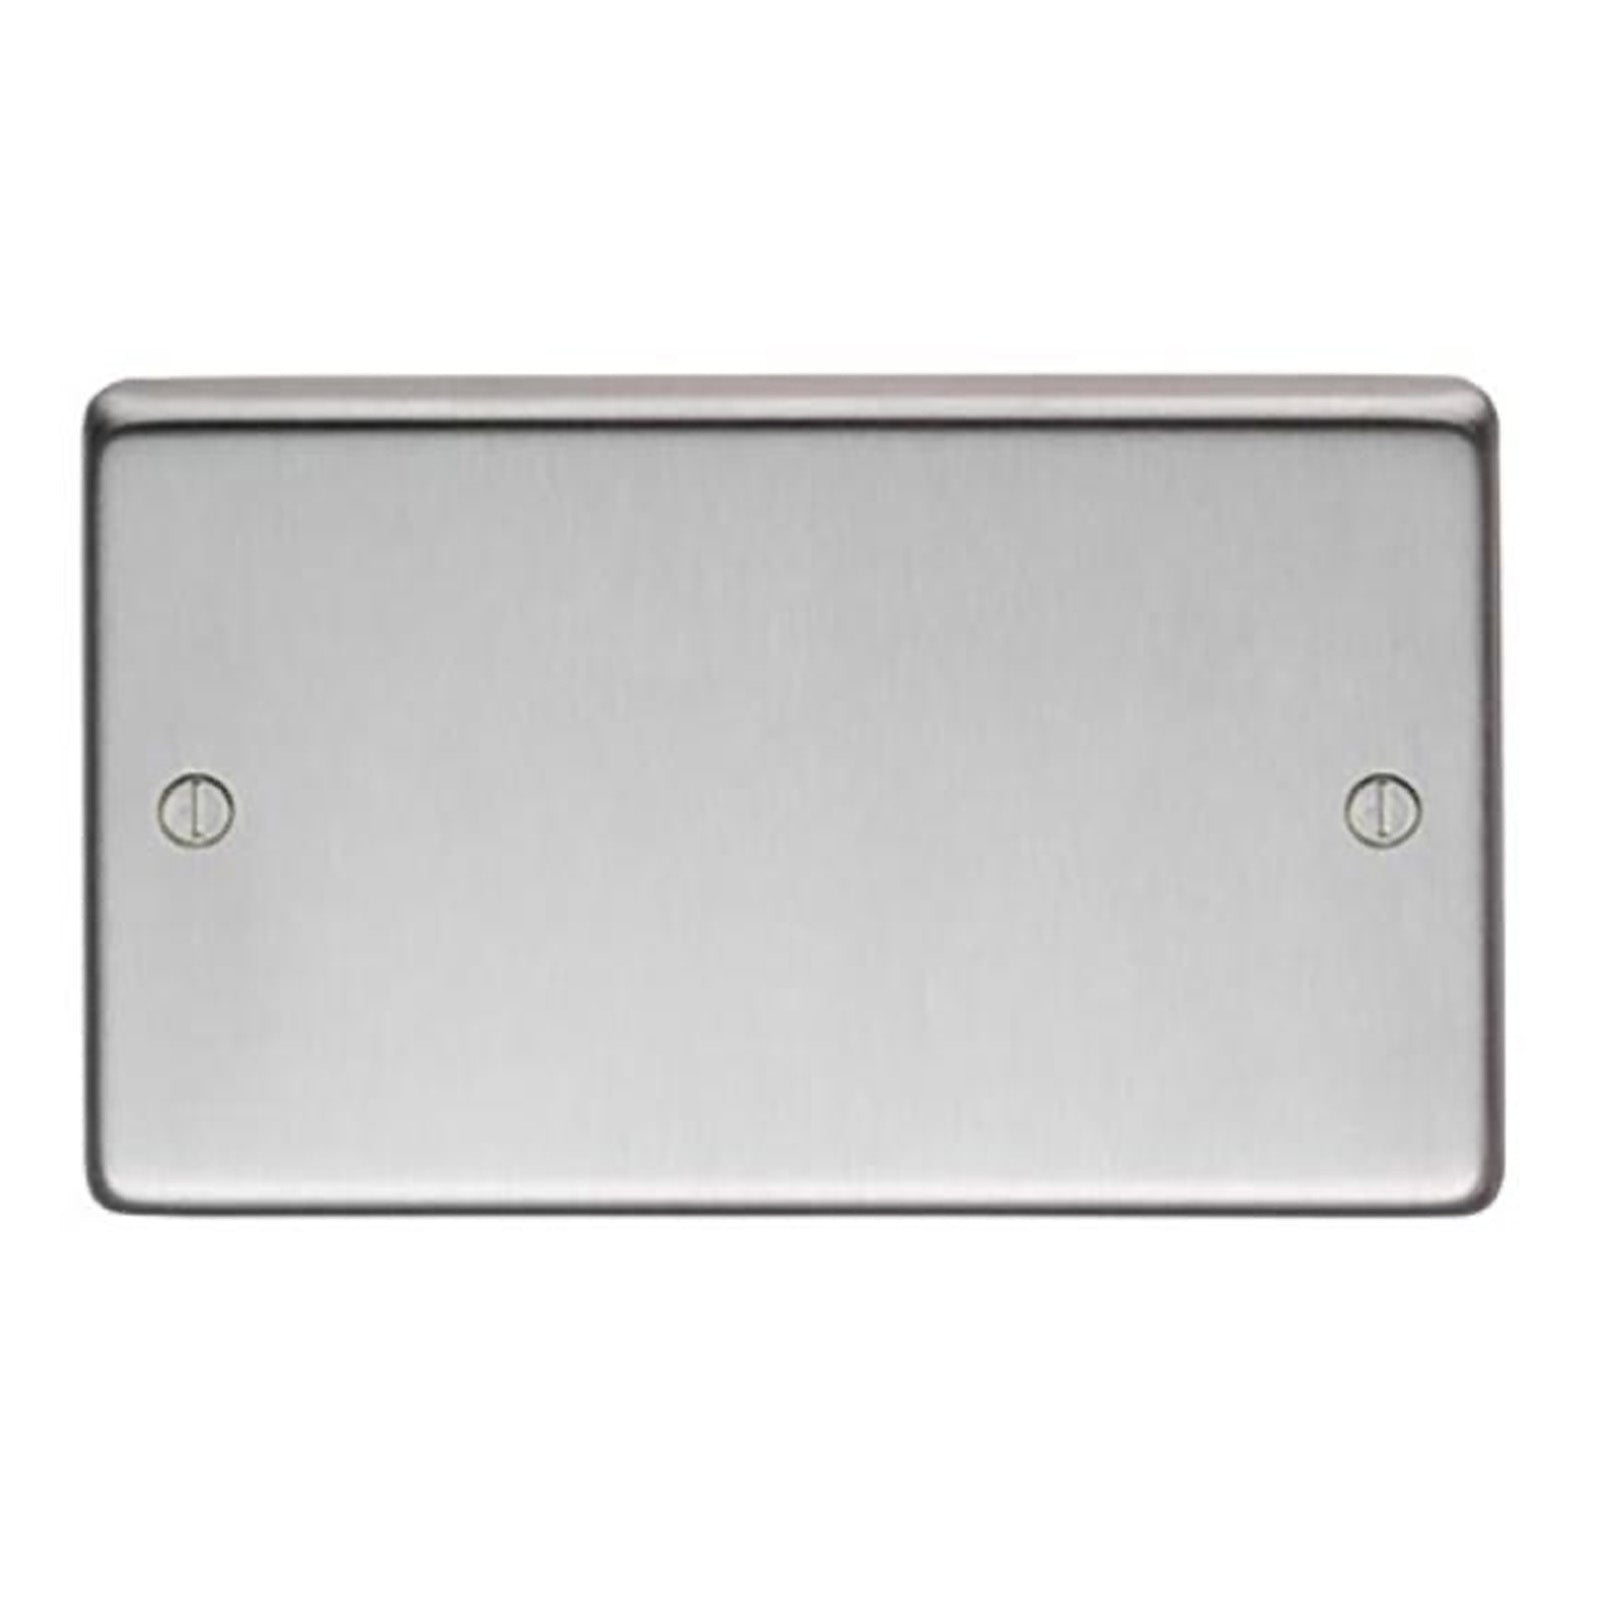 SHOW Image of Double Blank Plate with Satin Stainless Steel finish